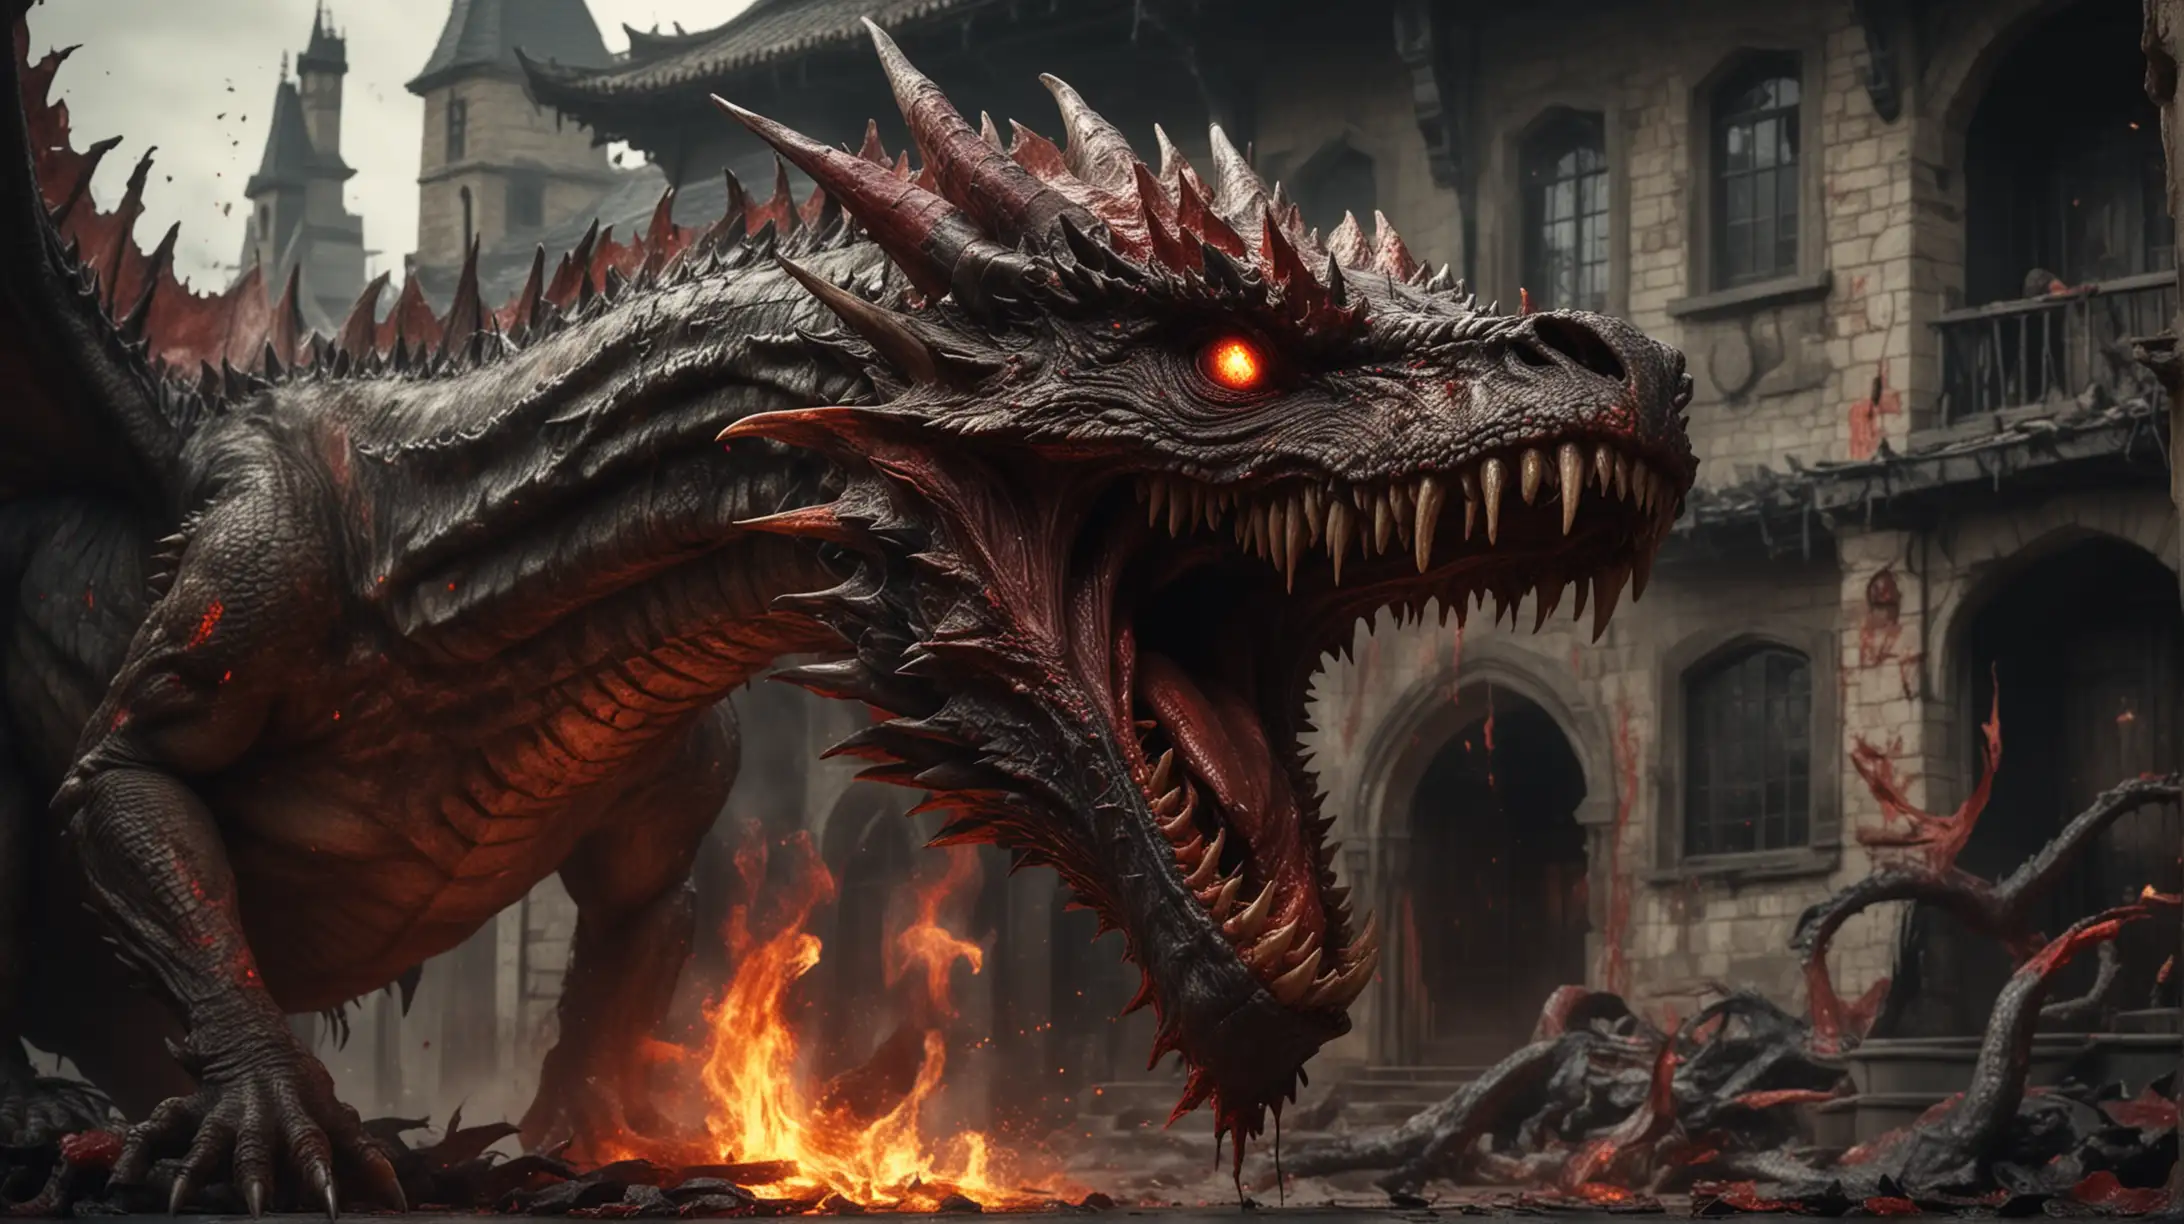 Bloody horror dragon with scary face and huge teeth spitting fire on people. Dead people everywhere . House of dragon style

Make the dragon really scary 